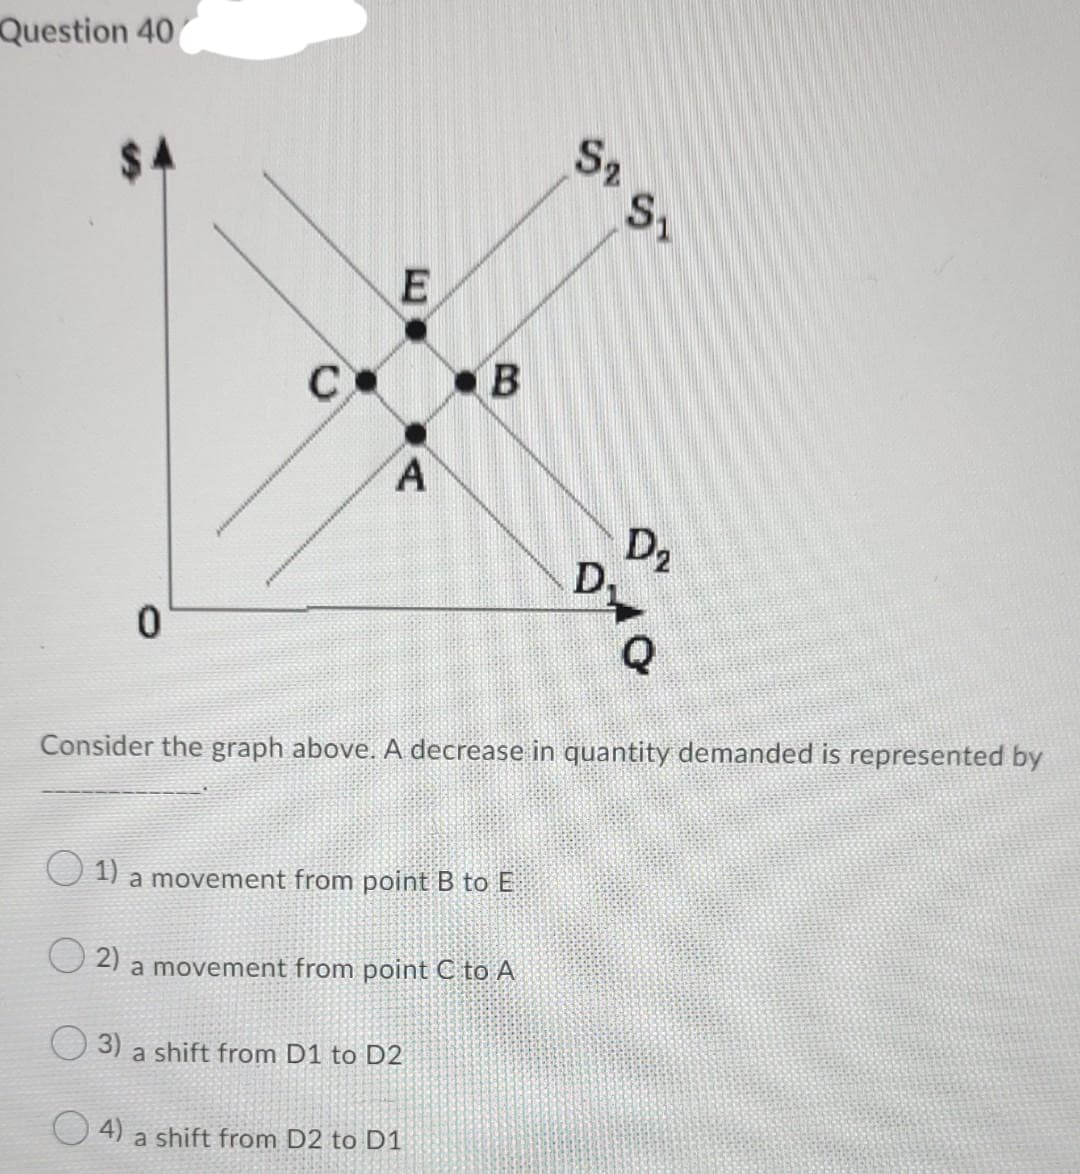 Question 40
$4
S2
E
C.
A.
D2
D,
Q
Consider the graph above. A decrease in quantity demanded is represented by
1)
a movement from pointB to E
2)
a movement from point C to A
3) a shift from D1 to D2
4)
a shift from D2 to D1
